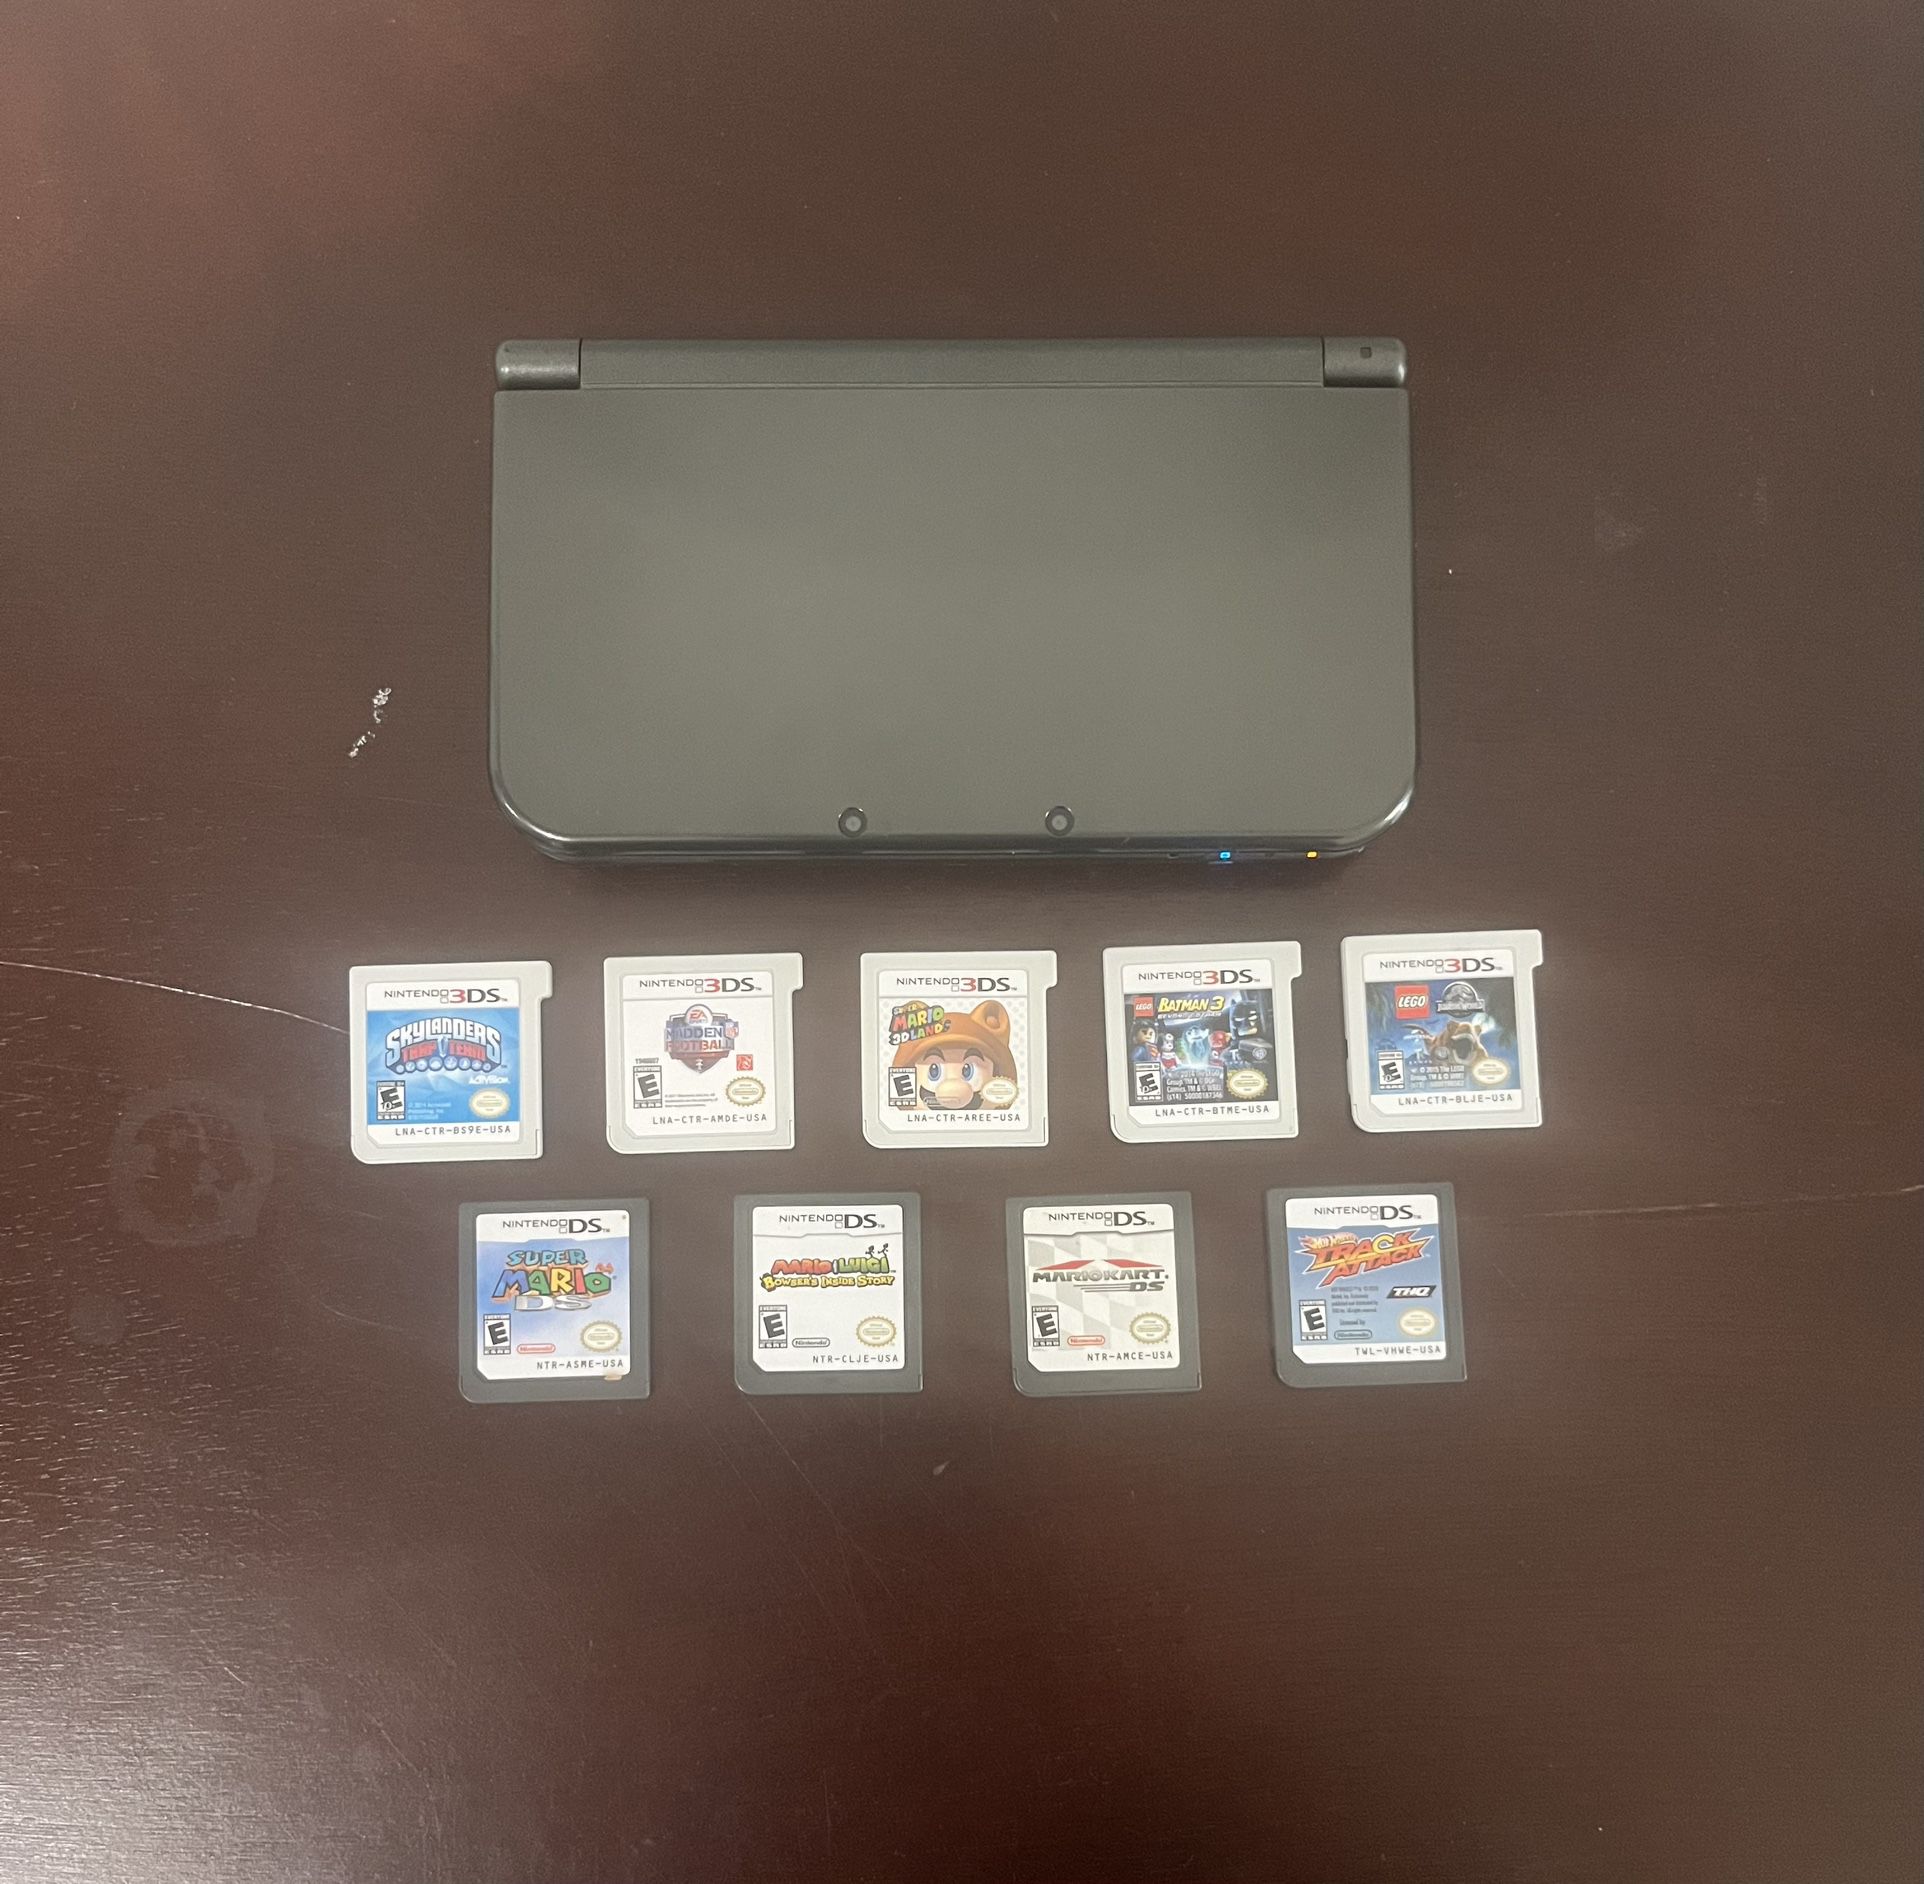 3DS XL with 9 games, a charger, and a case